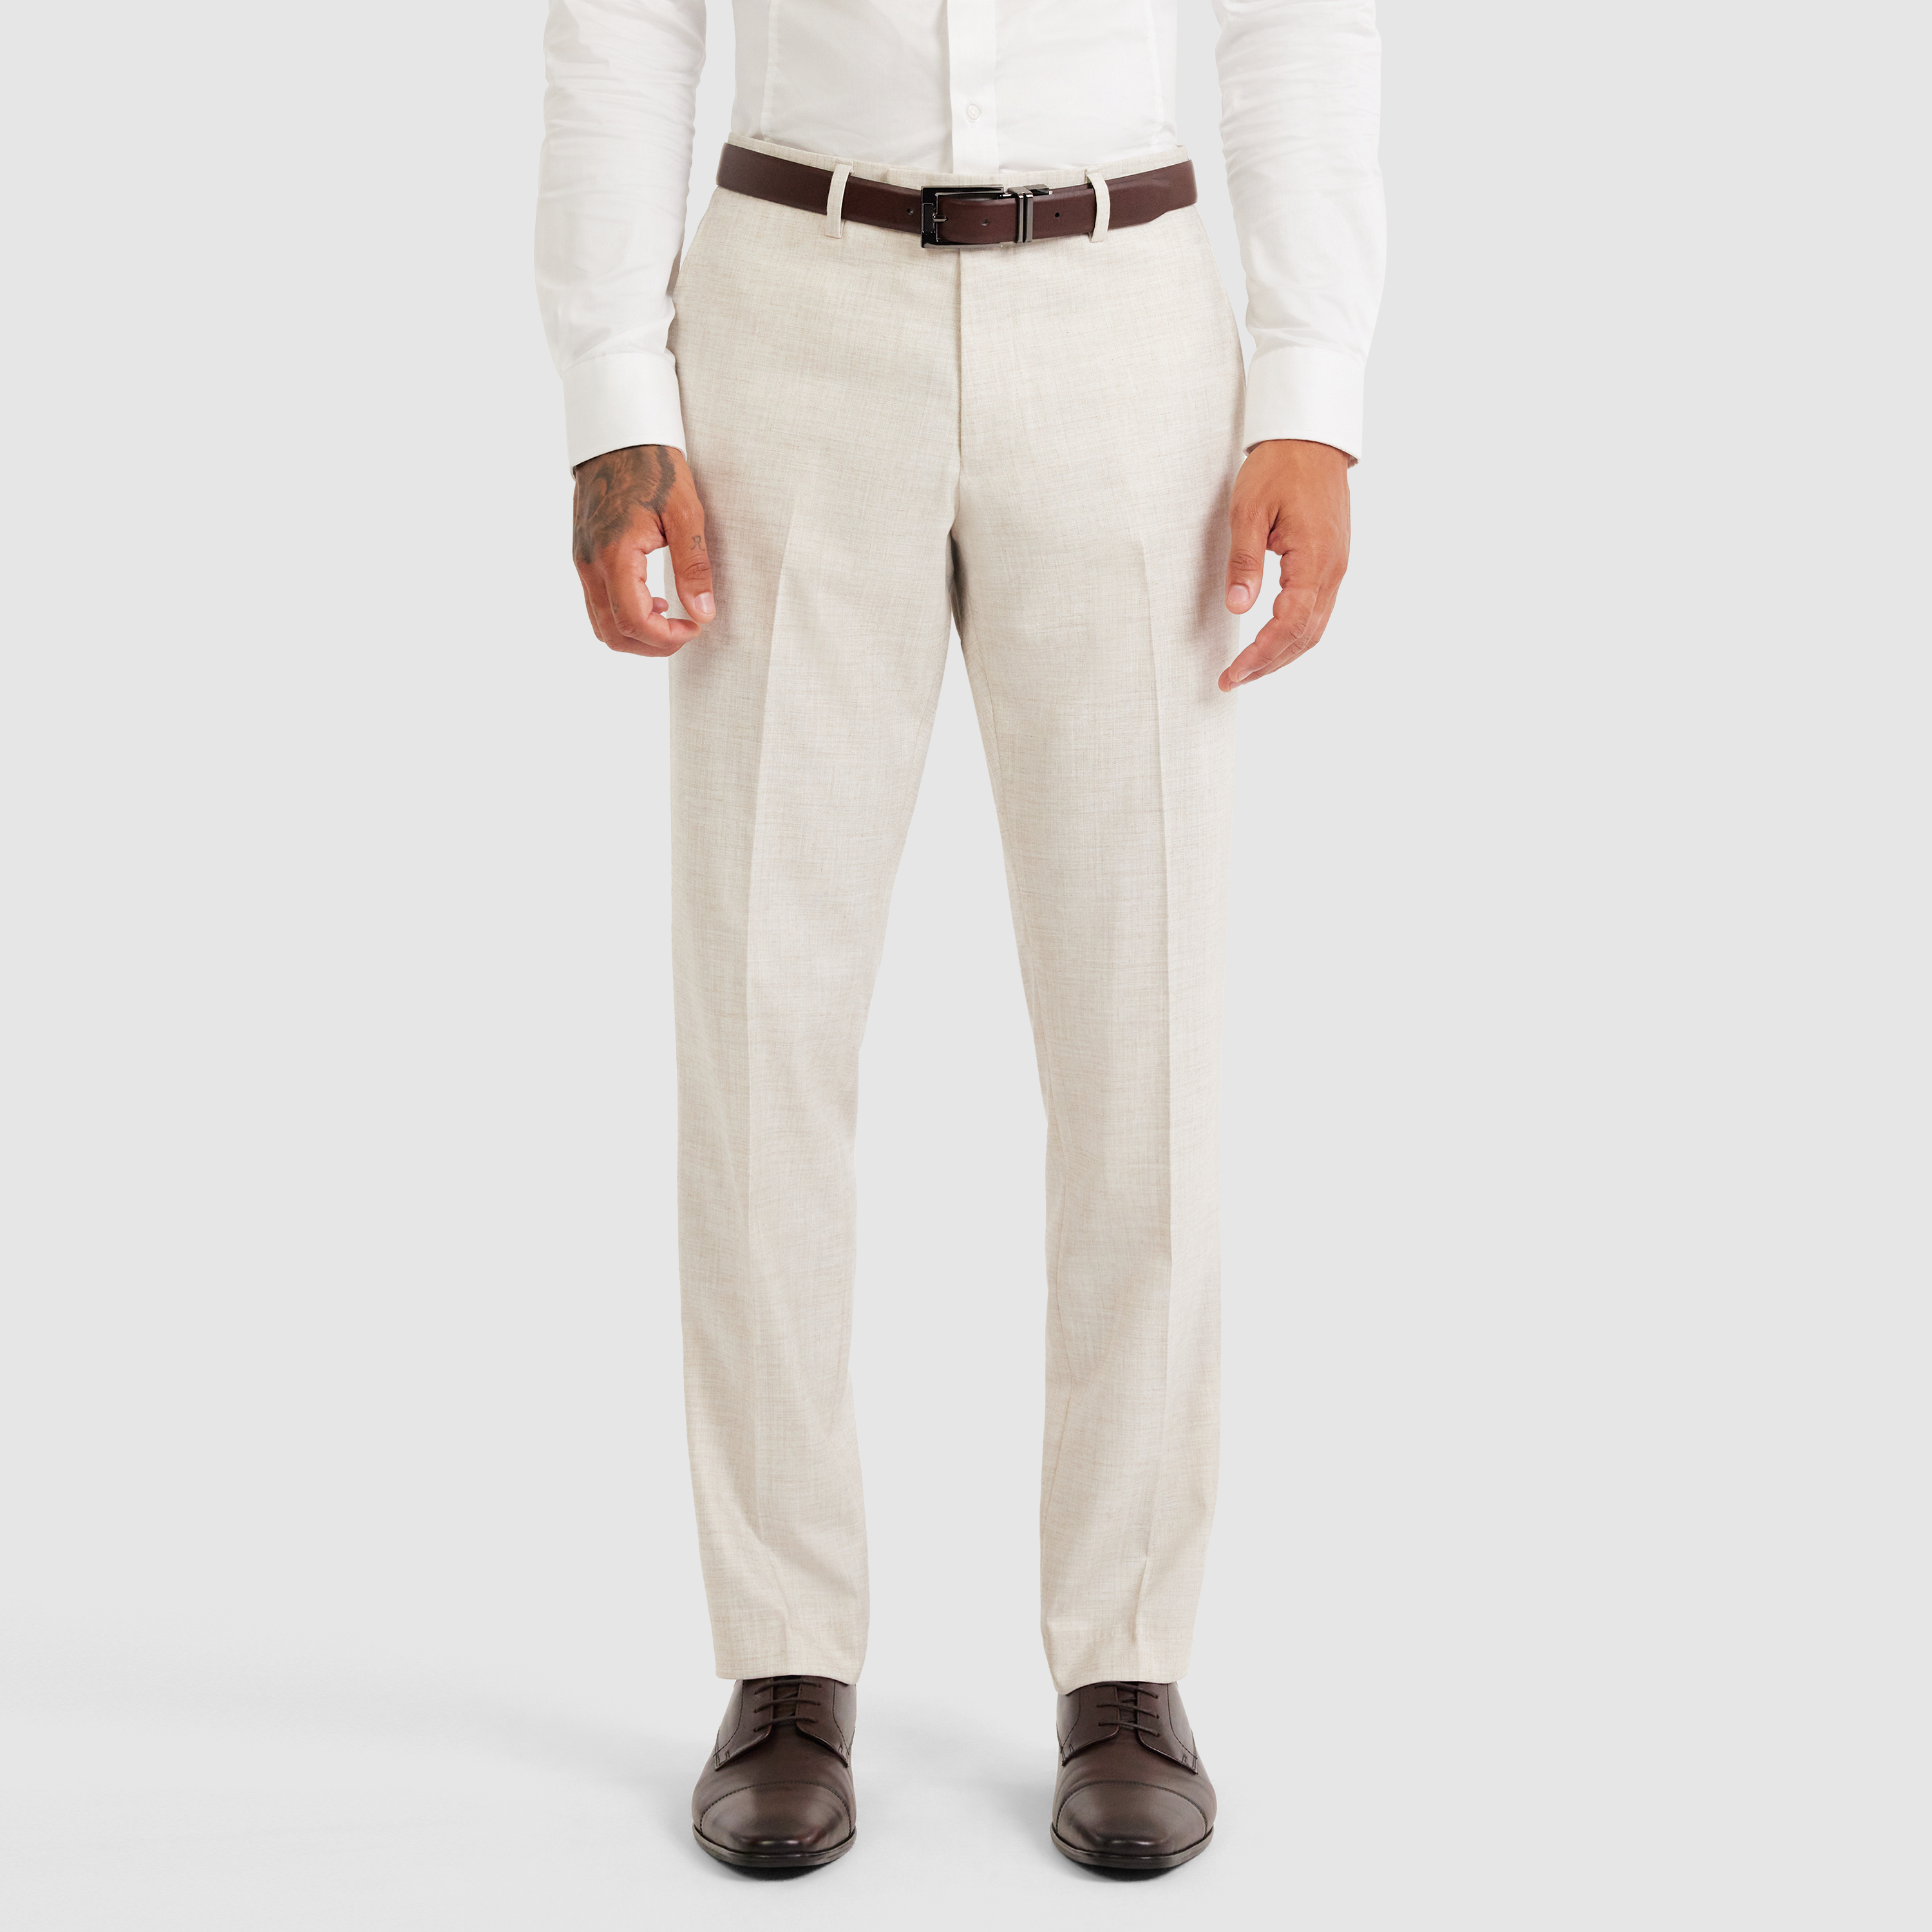 a man wearing a white shirt and brown pants Stock Photo by Icons8 |  PhotoDune